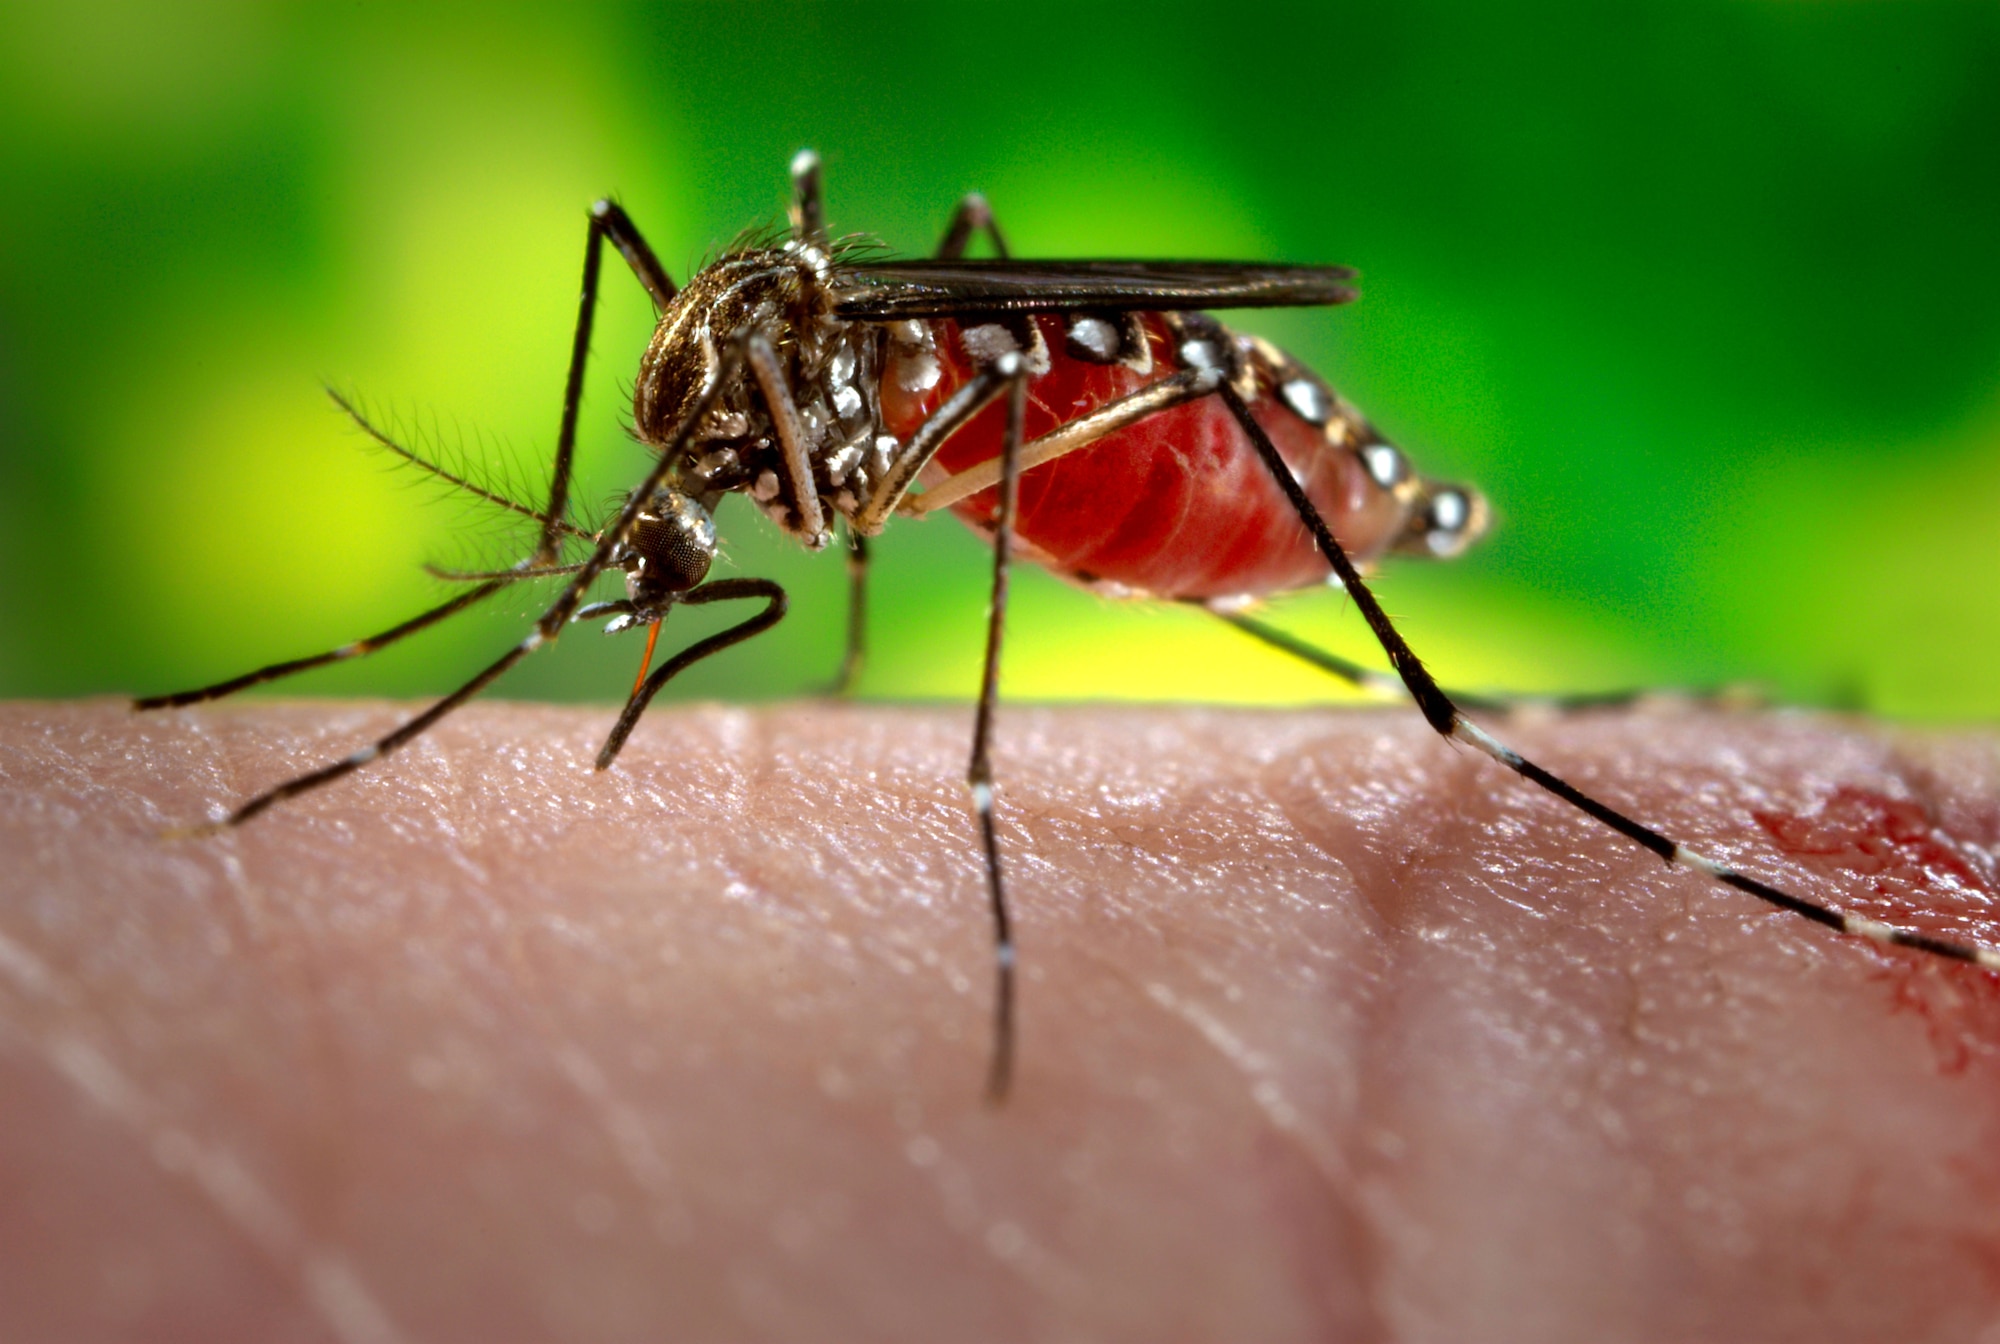 A female Aedes aegypti mosquito while she was in the process of acquiring a blood meal from her human host.